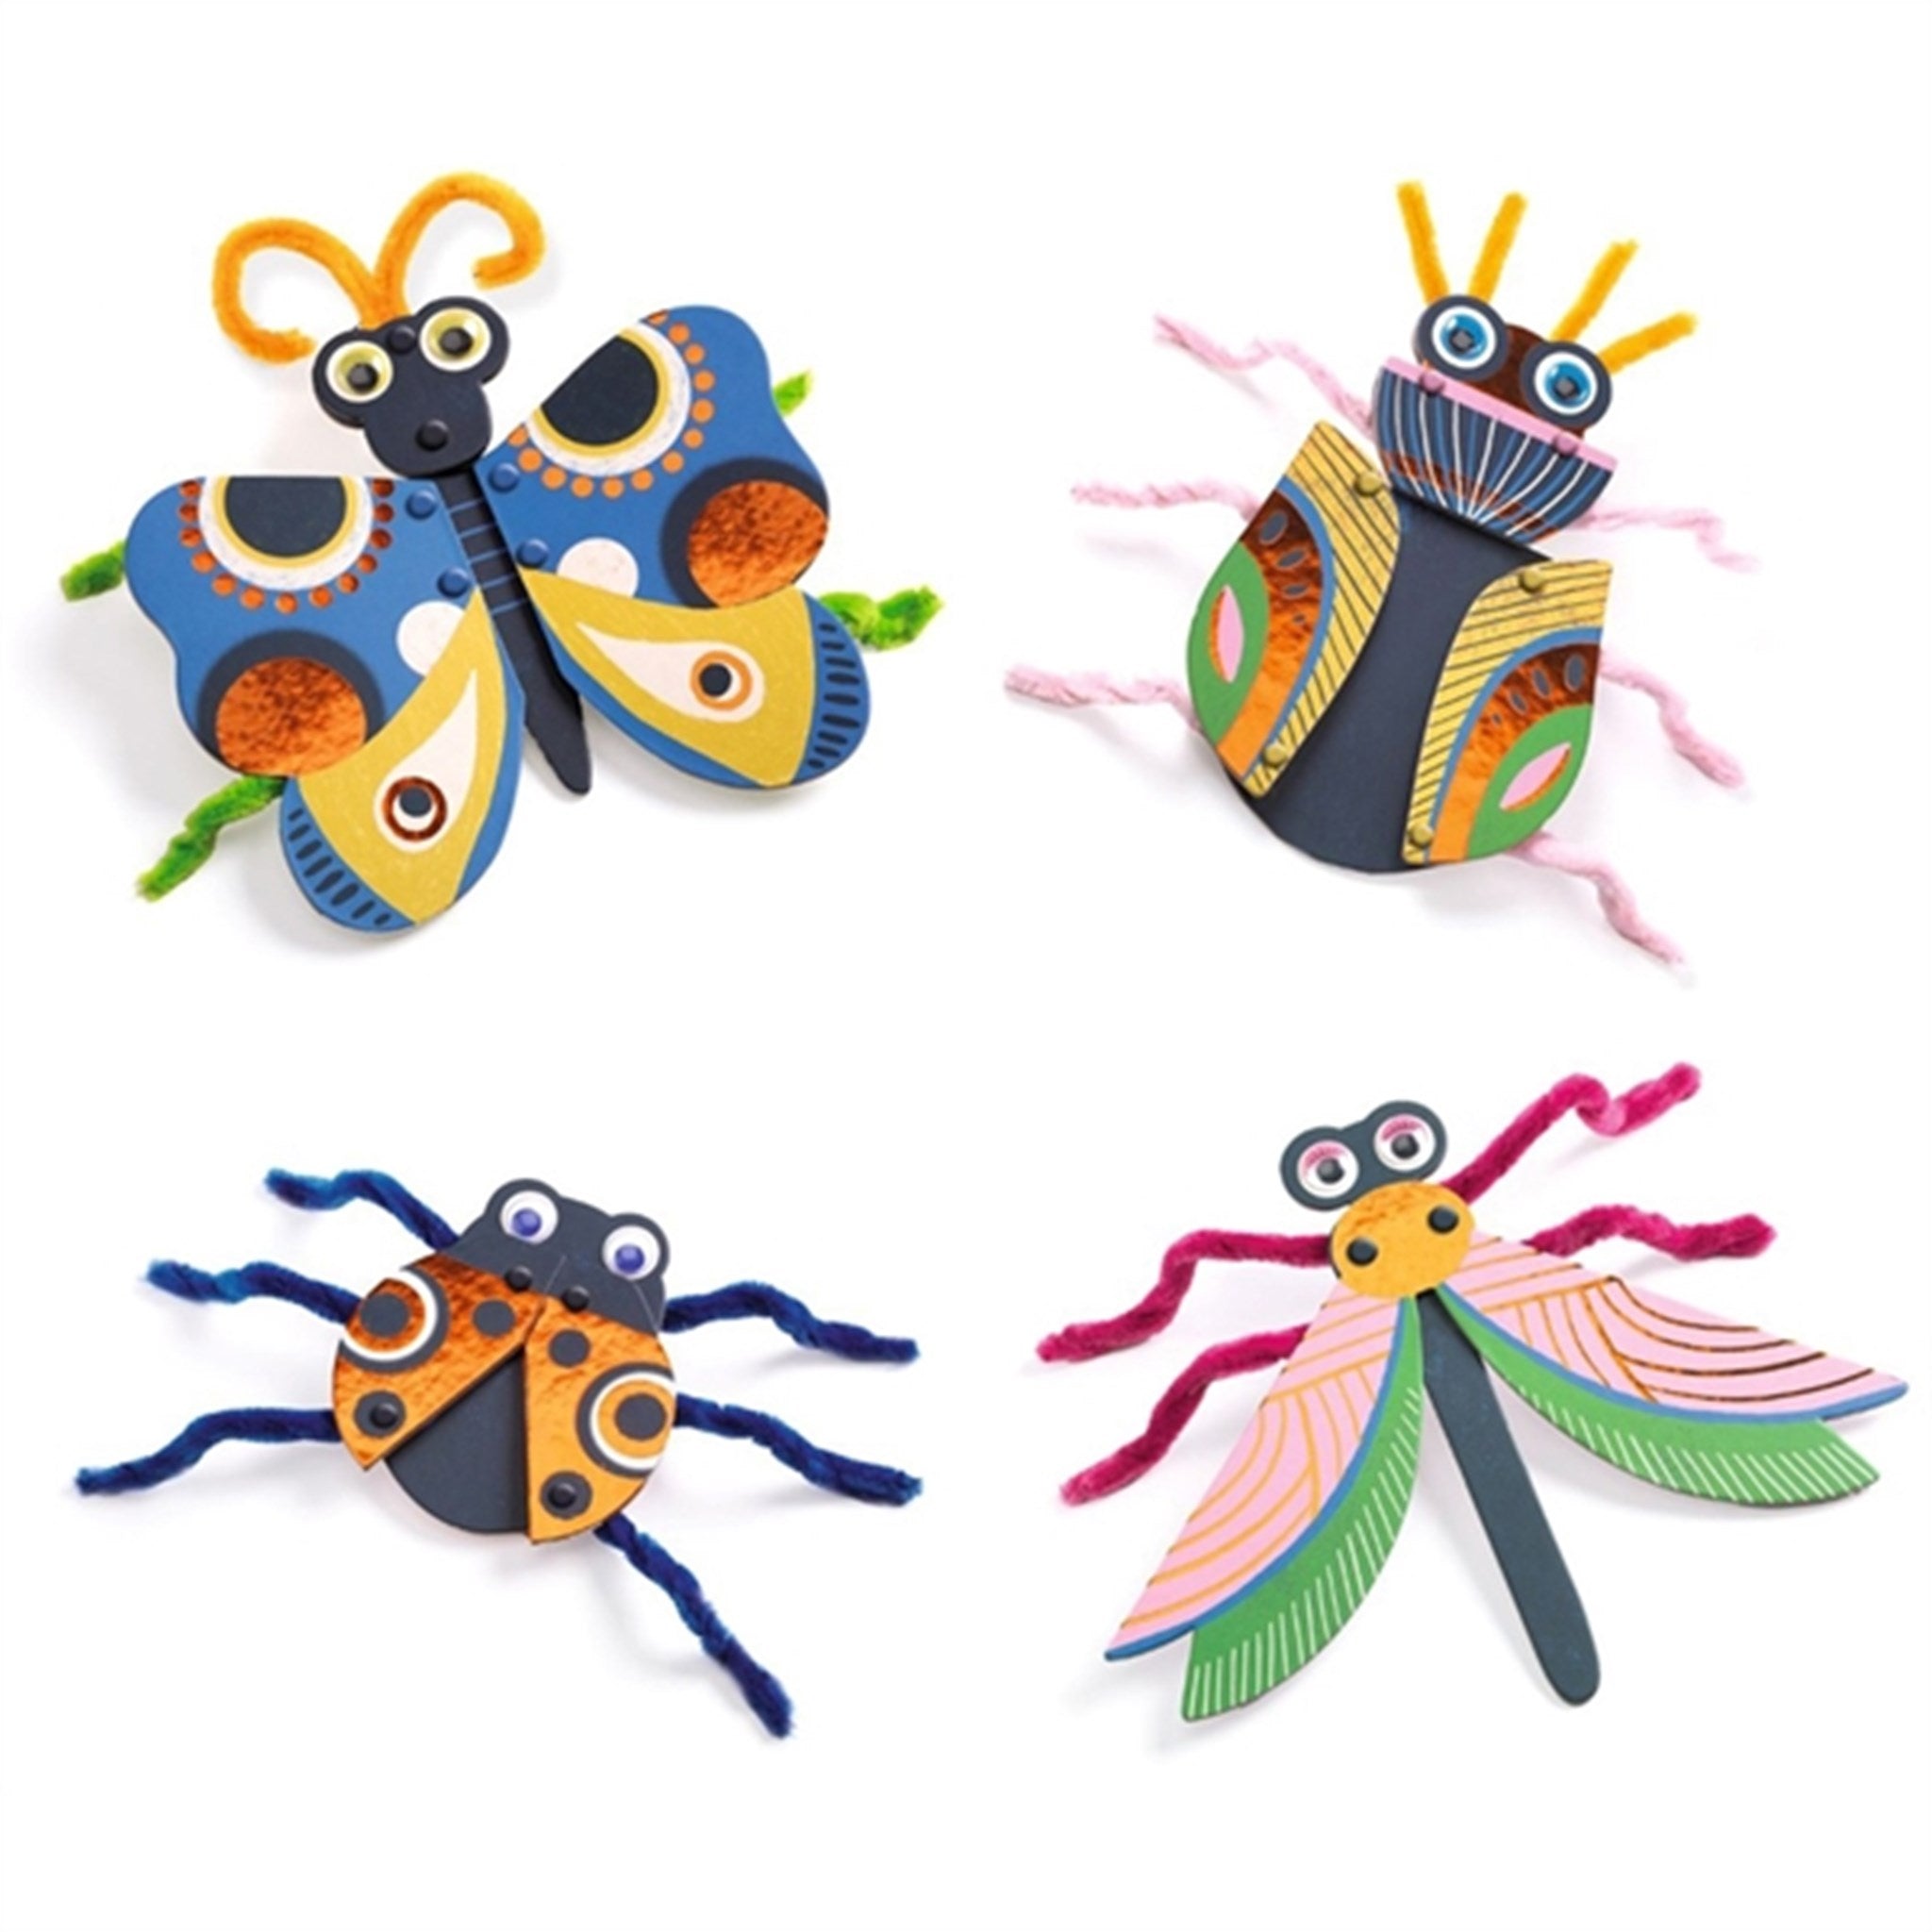 Djeco Creative 3D Insects 2